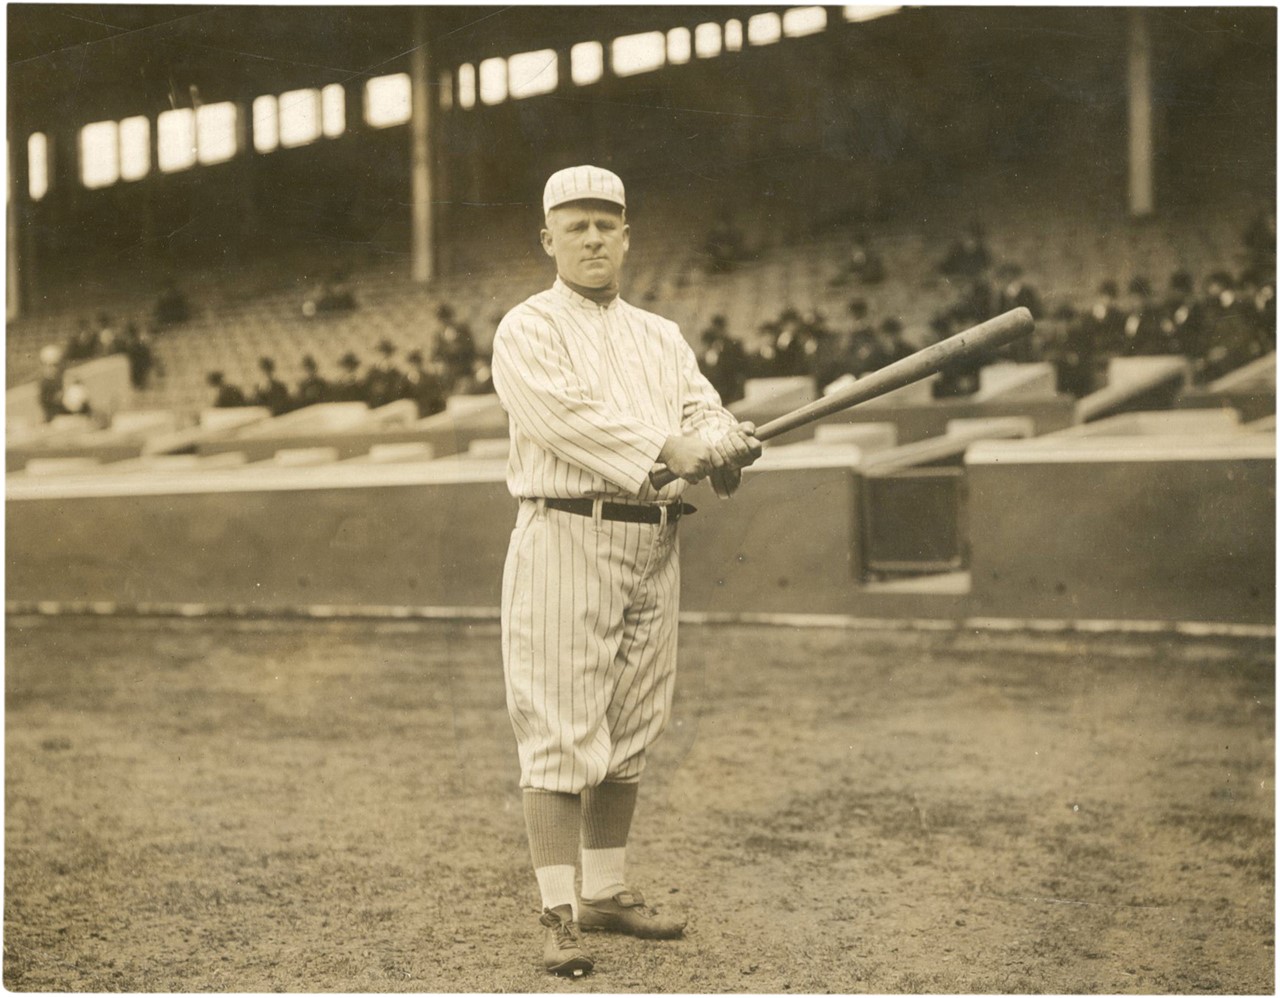 The Brown Brothers Collection - John McGraw Swinging Bat Photograph